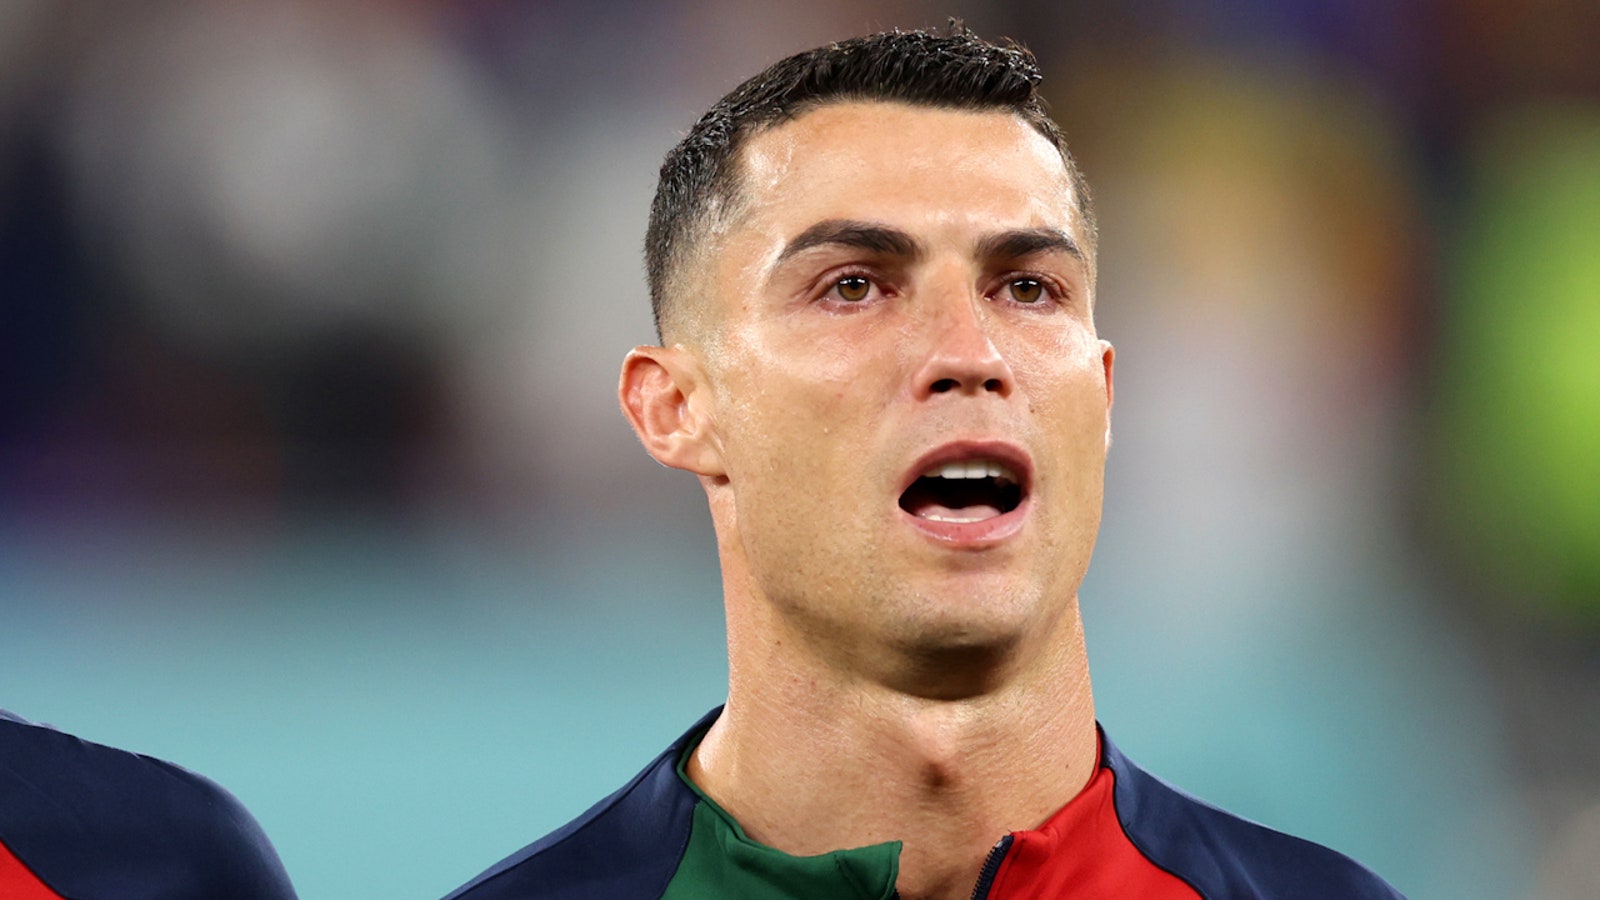 Cristiano Ronaldo bursts into tears during the Portuguese national anthem